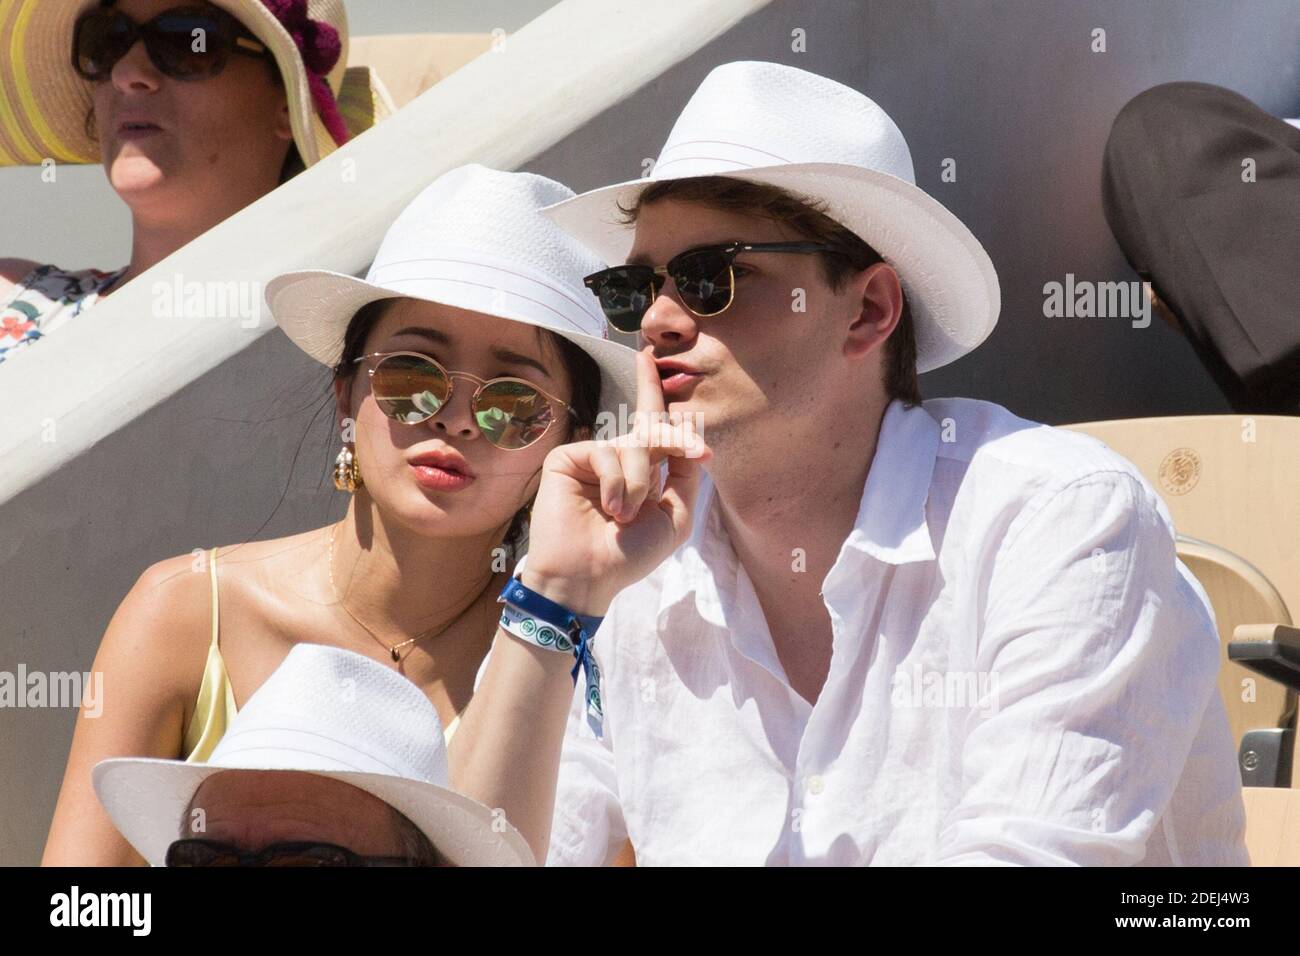 Yannick agnel and his girlfriend su park in stands during french tennis open at roland garros 